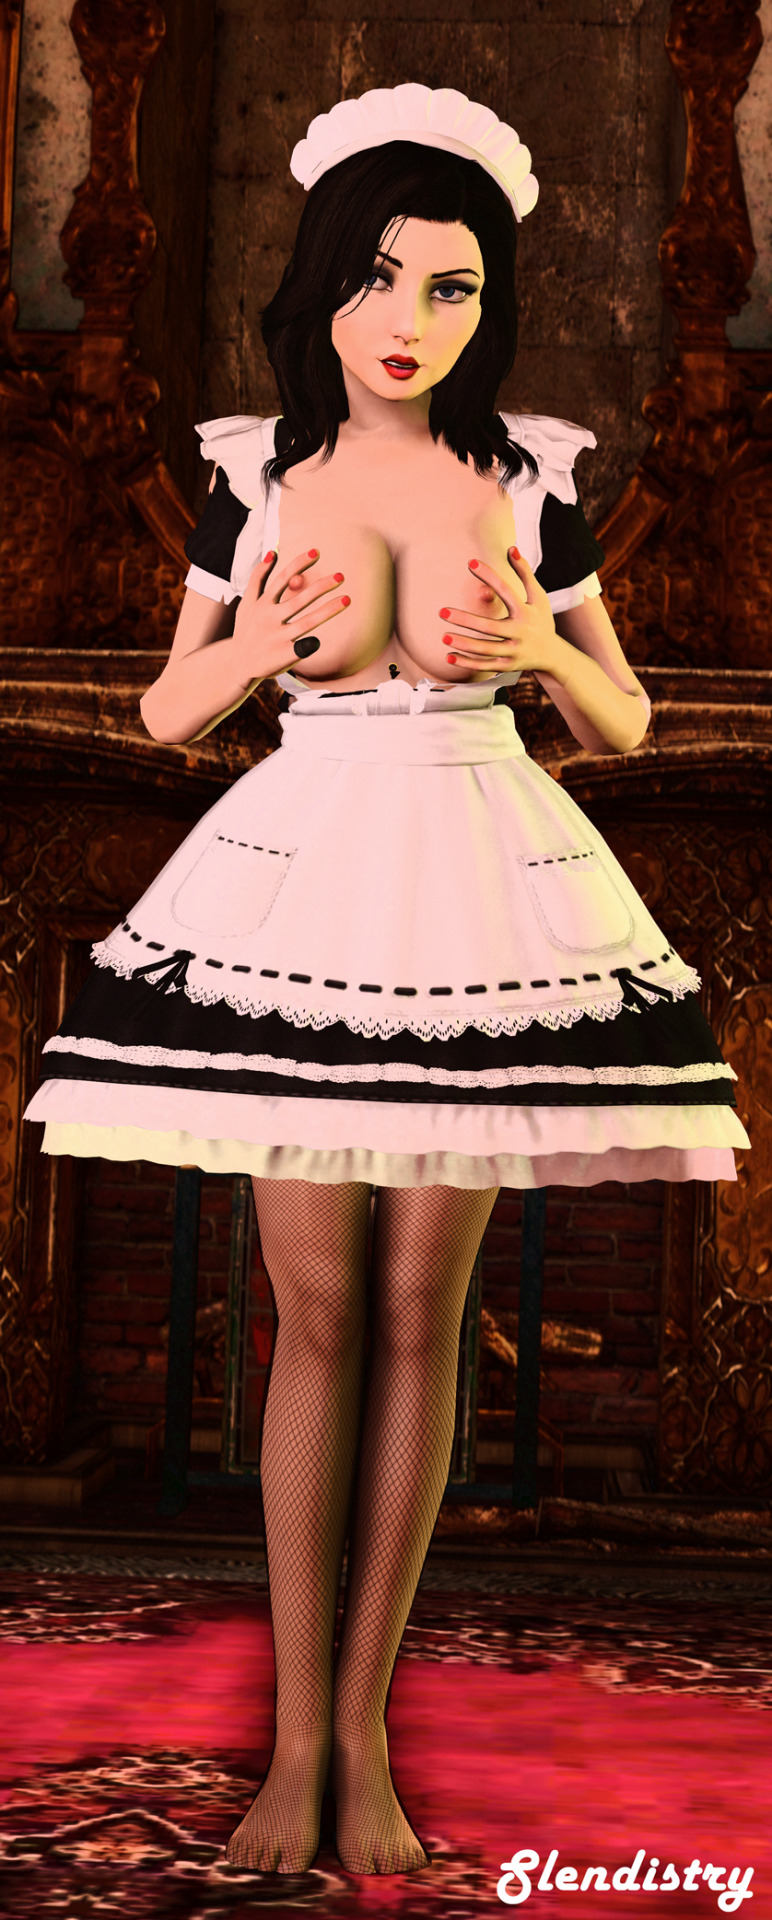 slendistry:   Liz Maid outfitFull Size (4k)  I hacked on Kokoro’s maid outfit to